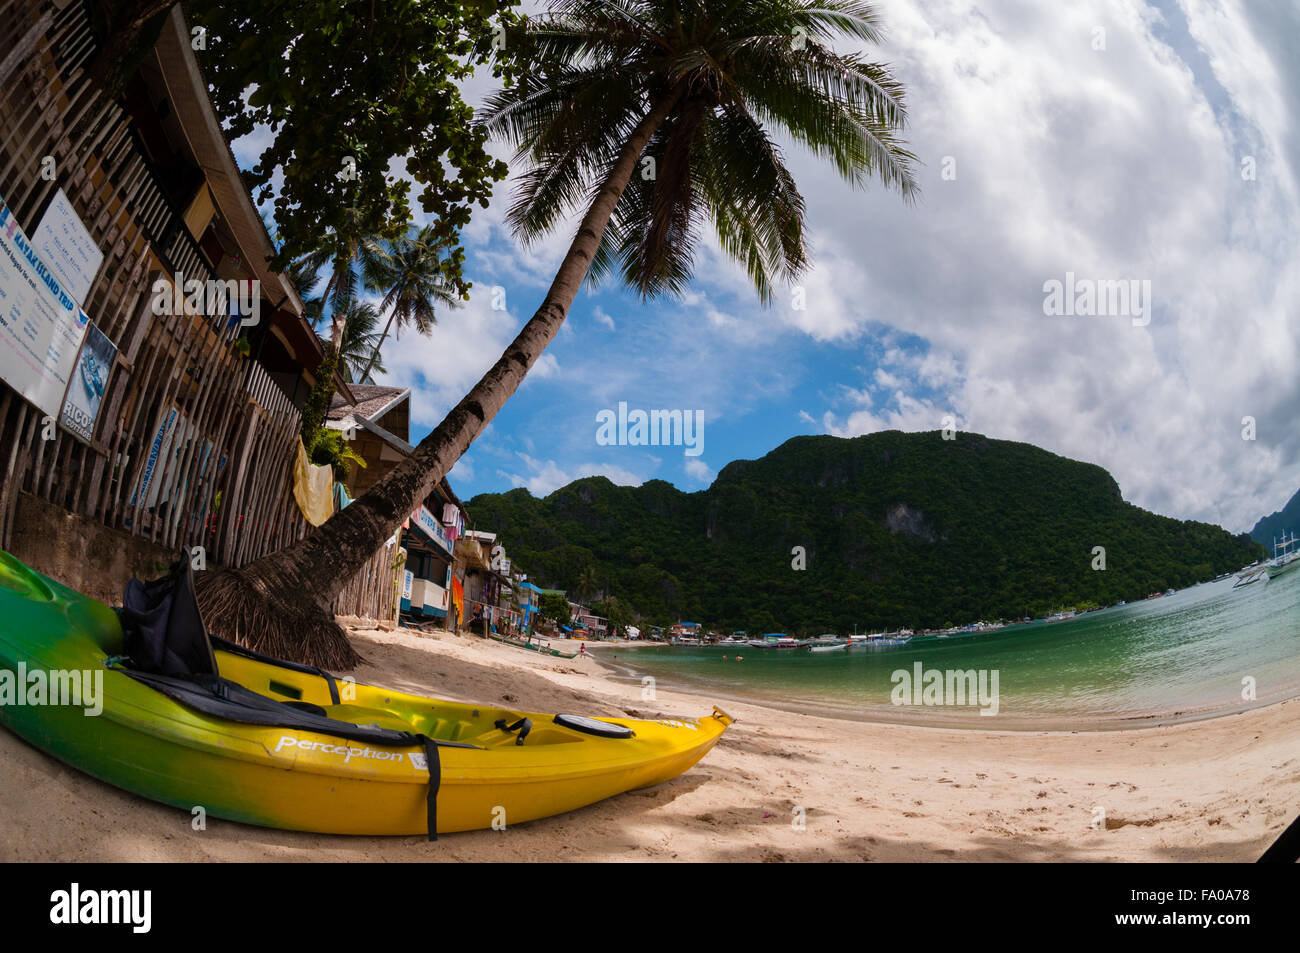 Yellow kayak laying on the sand beach with palm tree Stock Photo